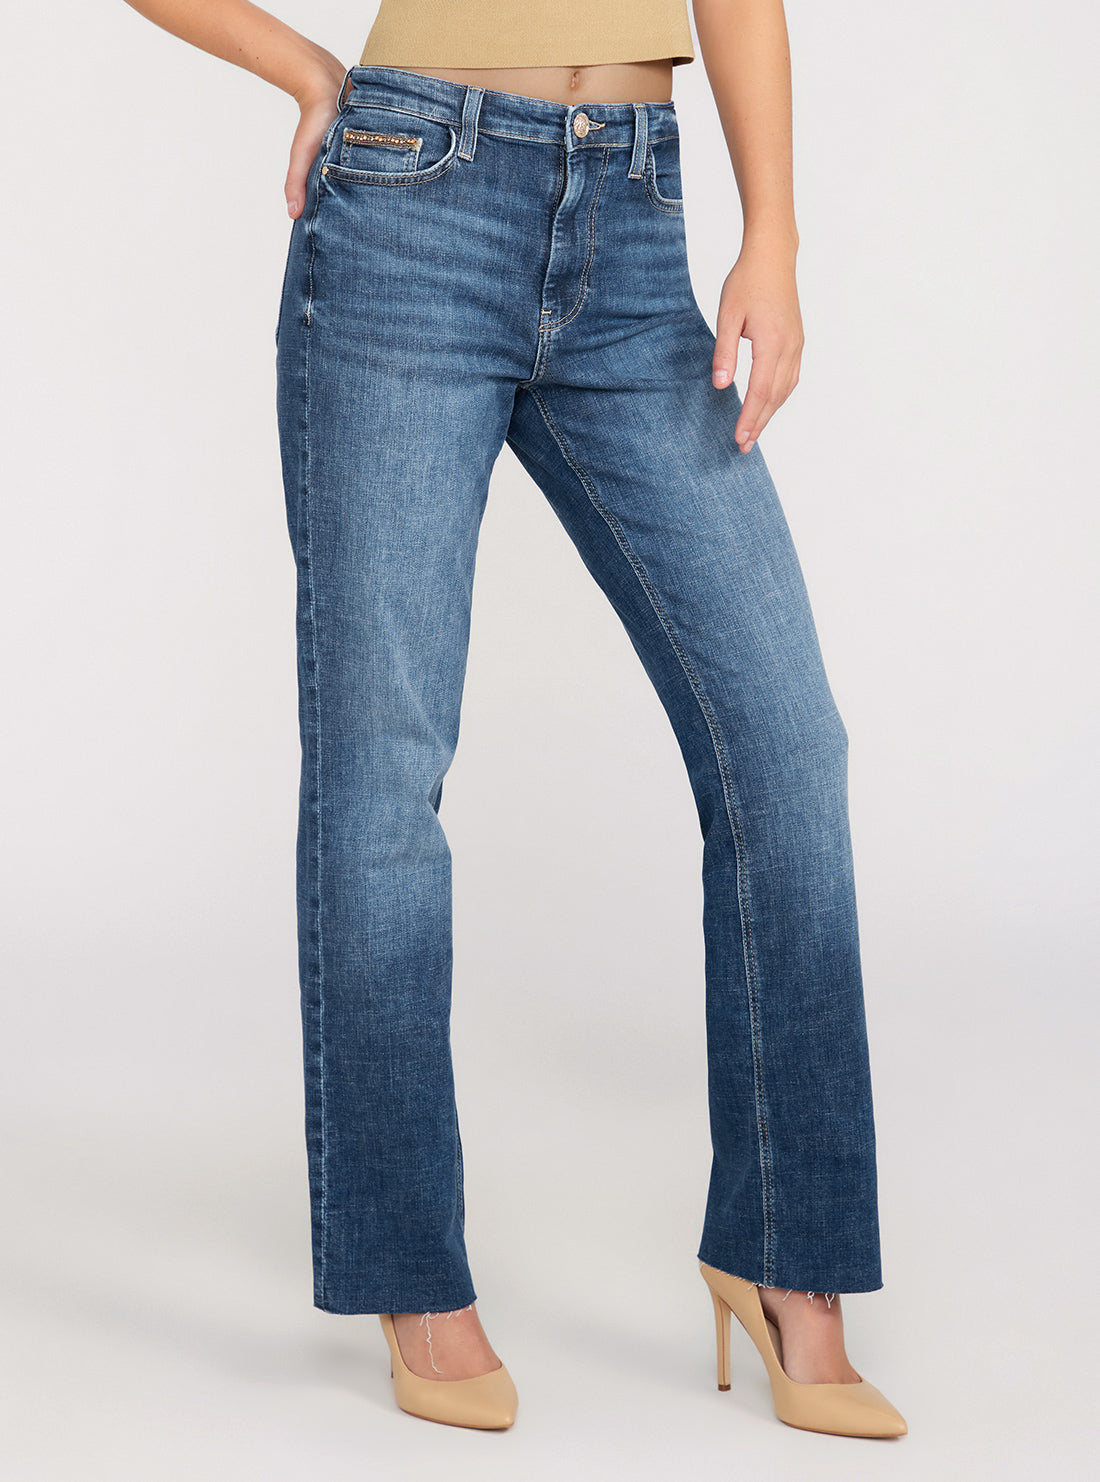 GUESS Mid-Rise Straight Leg 80s Denim Jeans side view